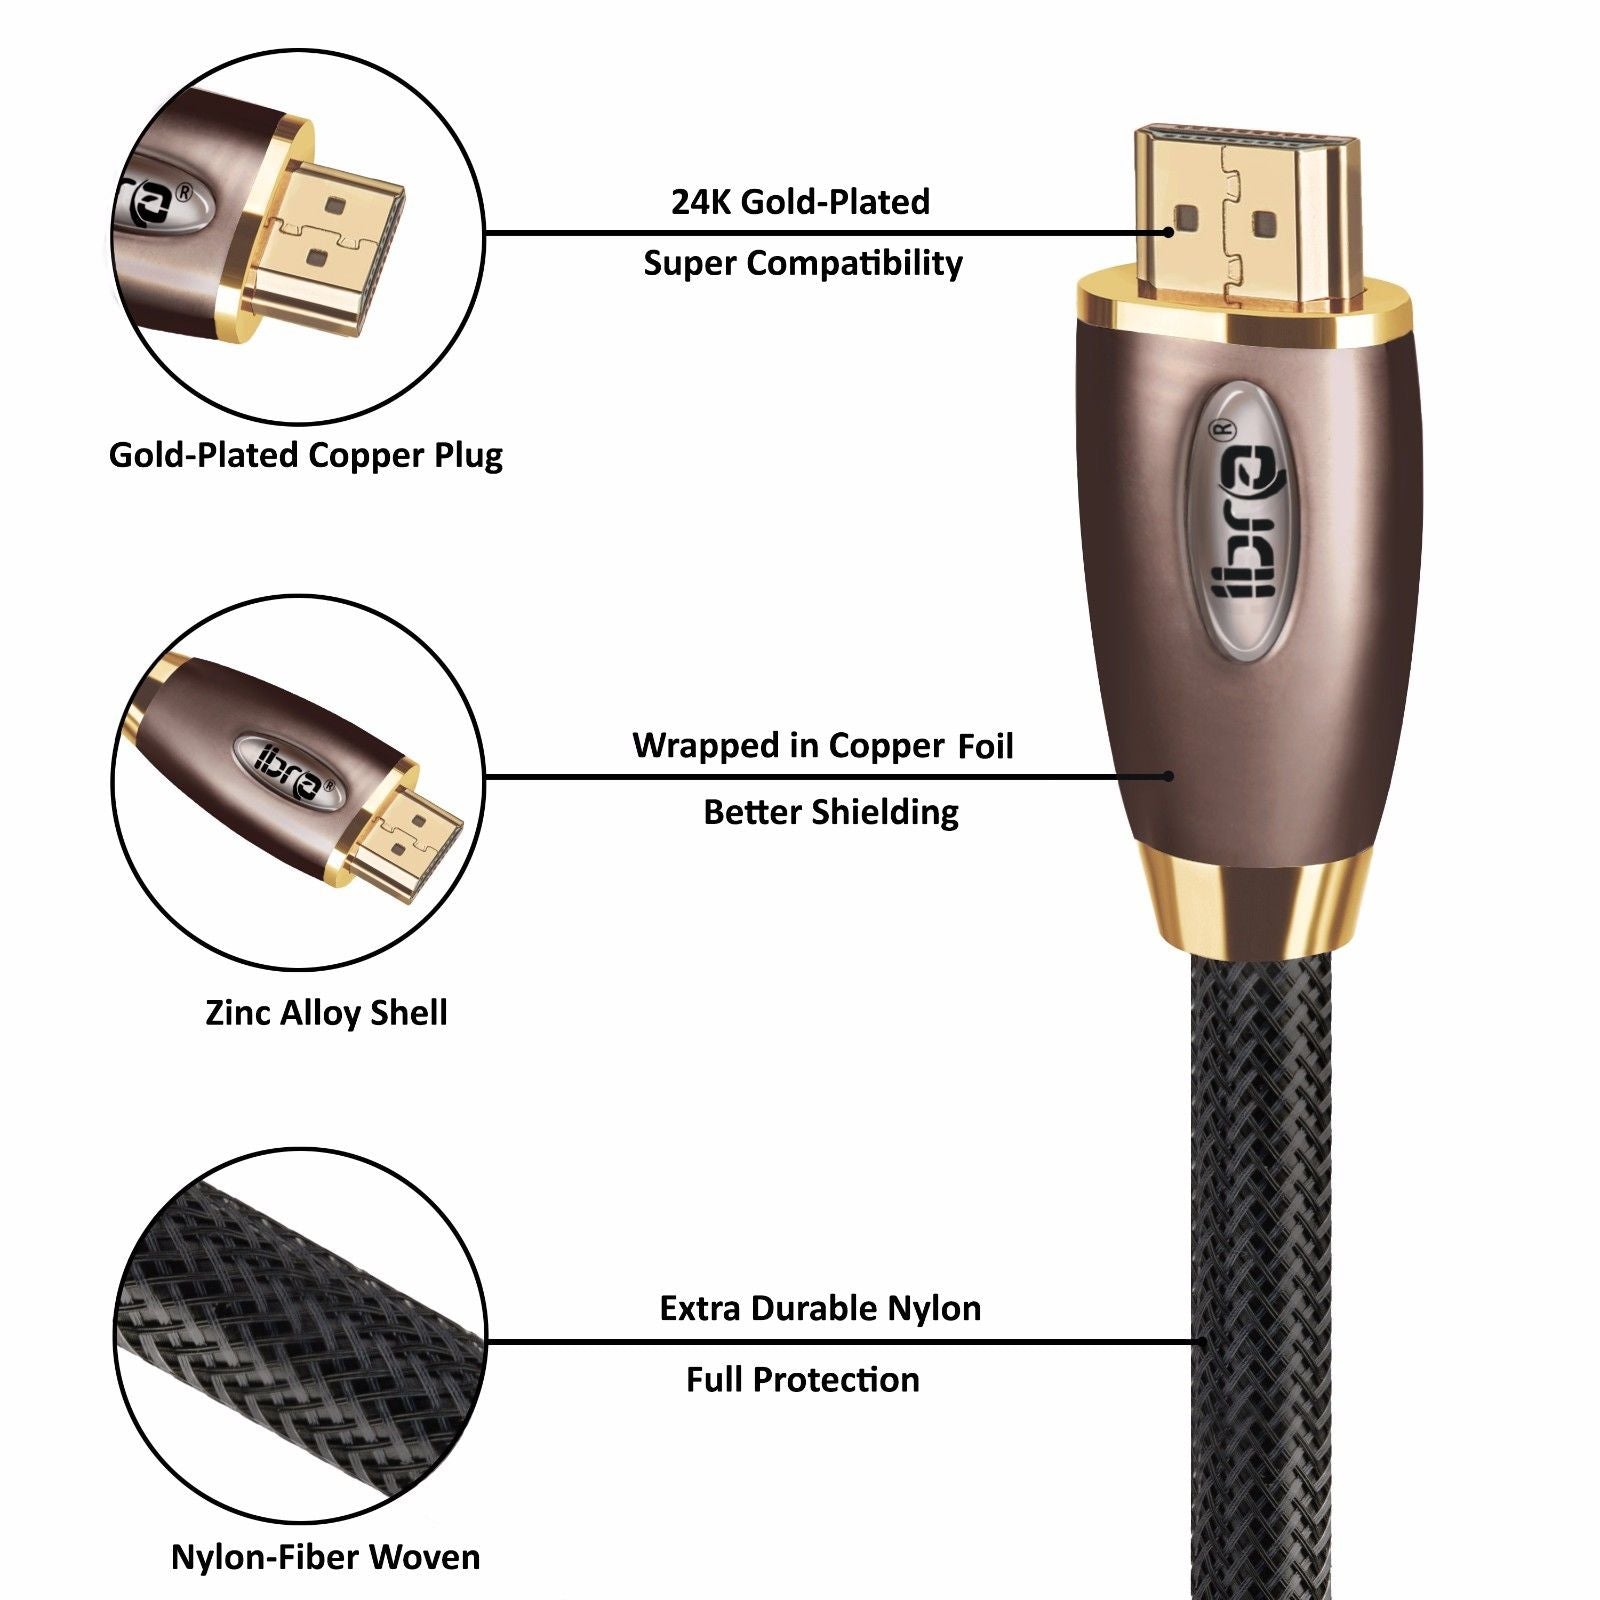 HDMI Cable 8M - 4K UHD HDMI 2.0(4K@60Hz) Ready -18Gbps-28AWG Braided Cord -Gold Plated Connectors -Ethernet,Audio Return -Video 4K 2160p,HD 1080p,3D -Xbox PlayStation PS3 PS4 PC Apple TV -IBRA RED